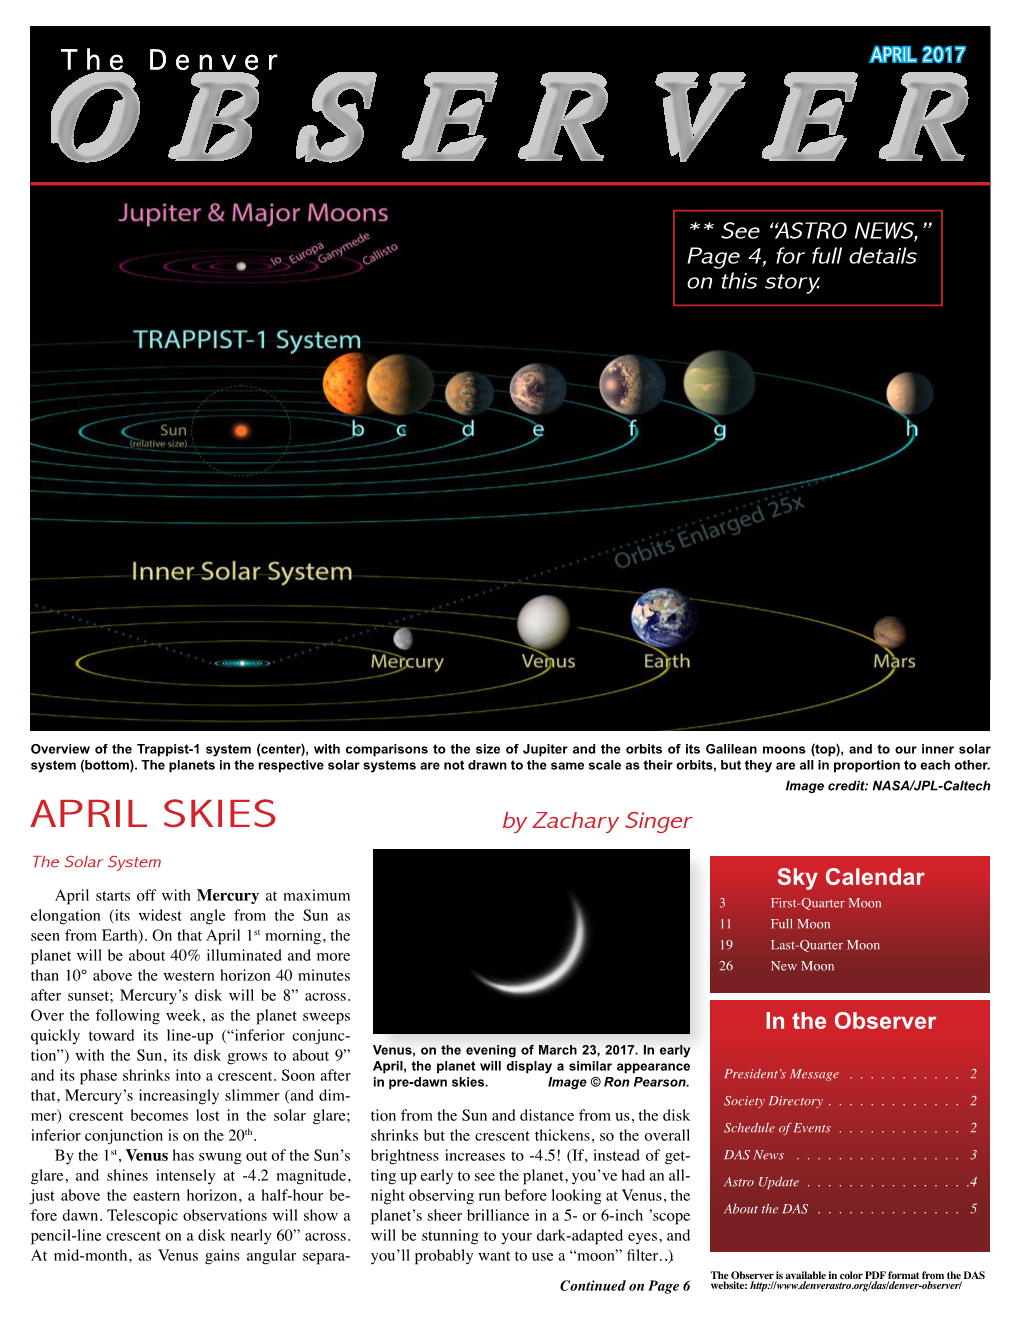 APRIL 2017 OBSERVER ** See “ASTRO NEWS,” Page 4, for Full Details on This Story